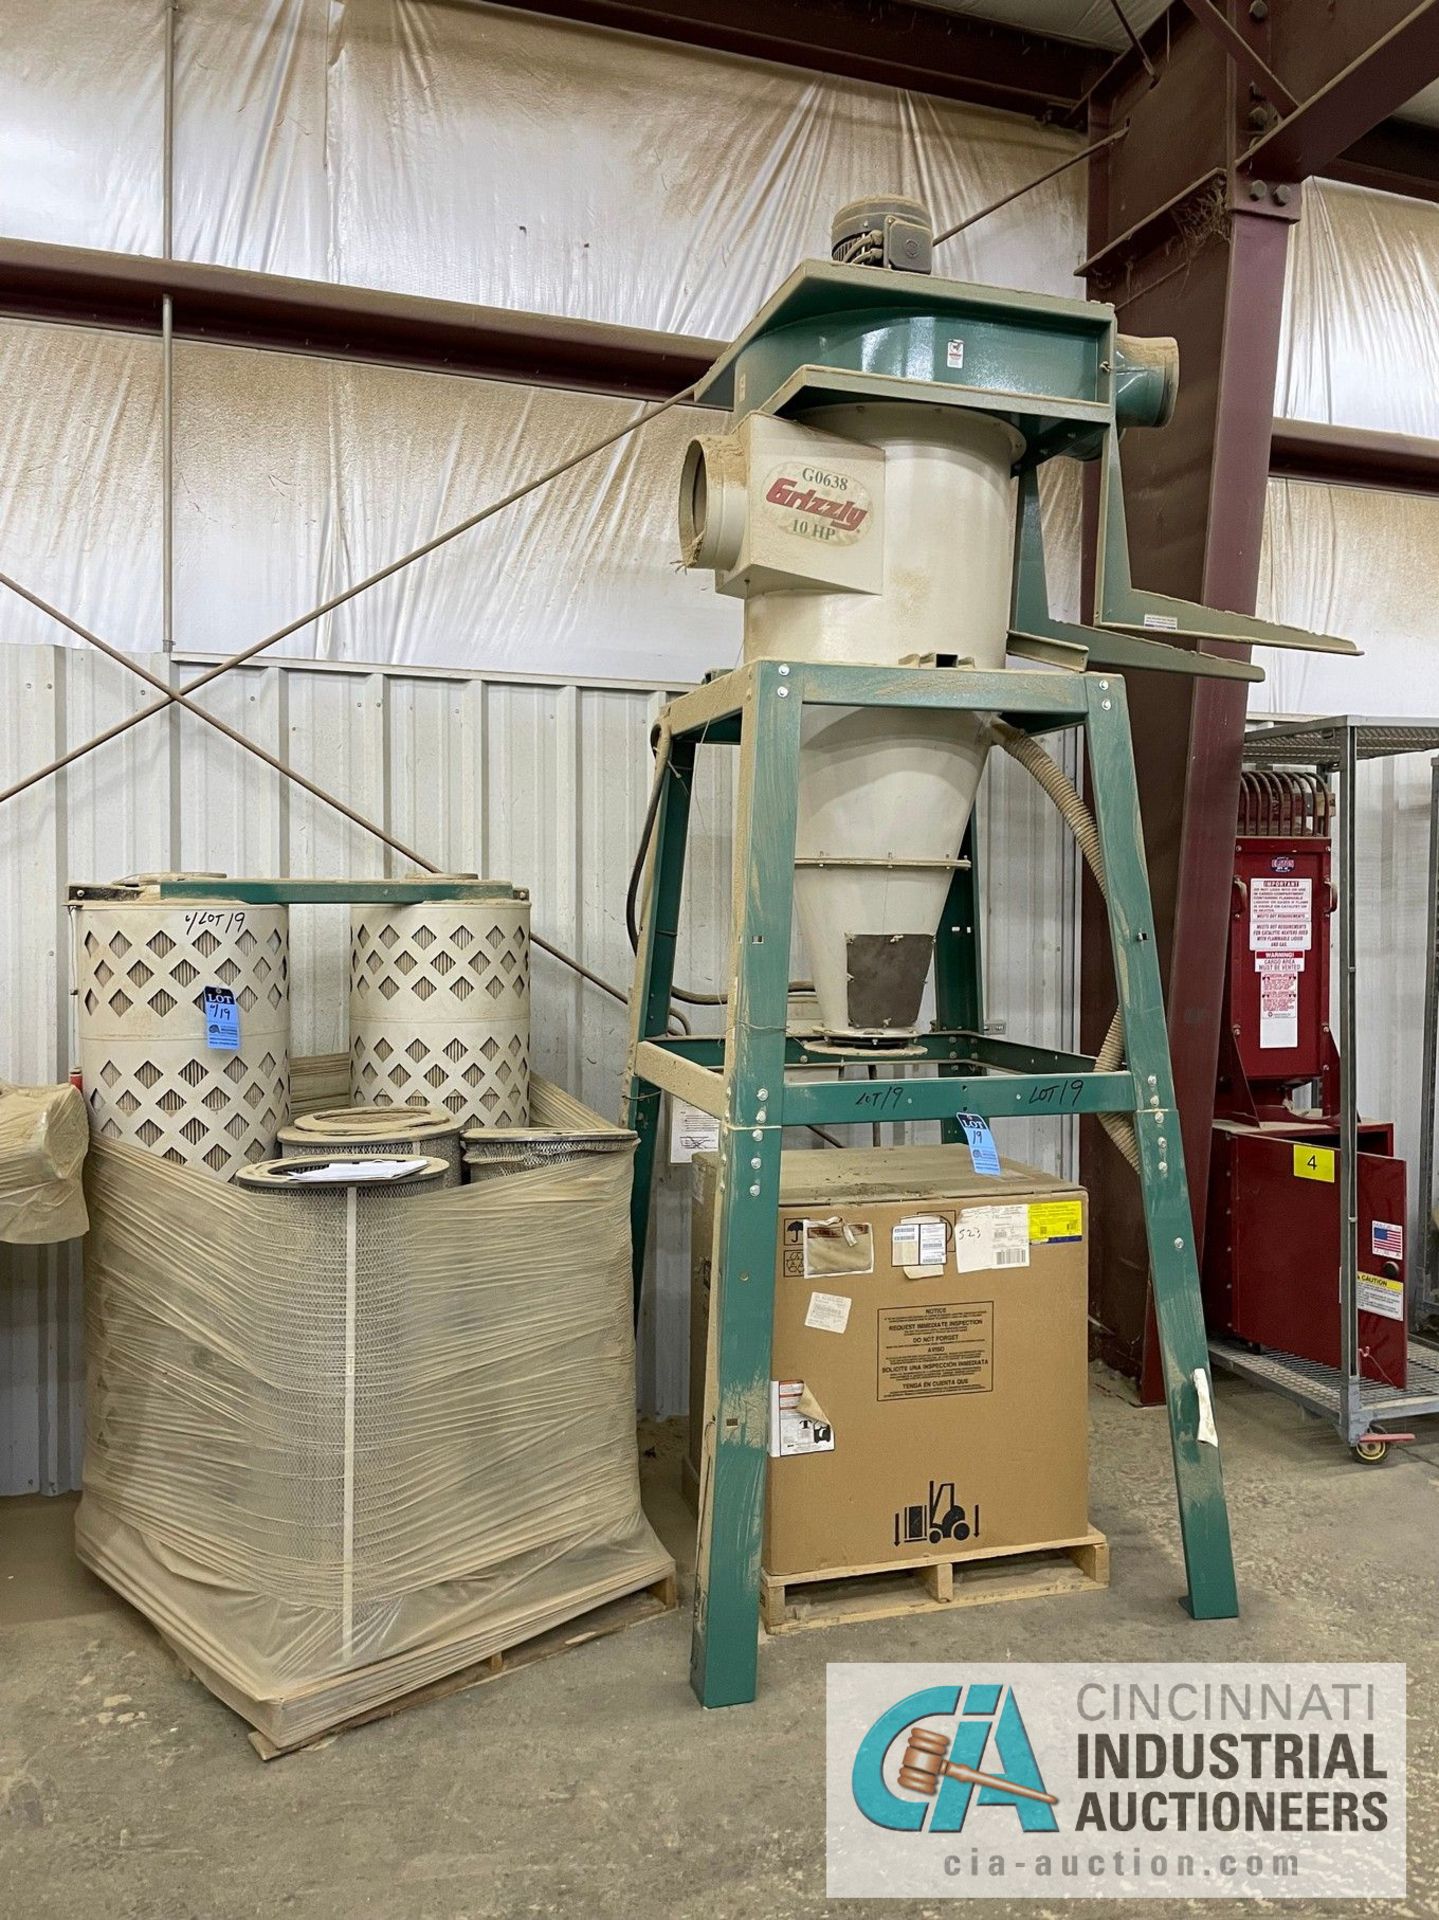 10-HP GRIZZLY MODEL G-0638 CYCLONE DUST COLLECTOR WITH SKID OF FILTERS, APPROX. 12' OVERALL HEIGHT